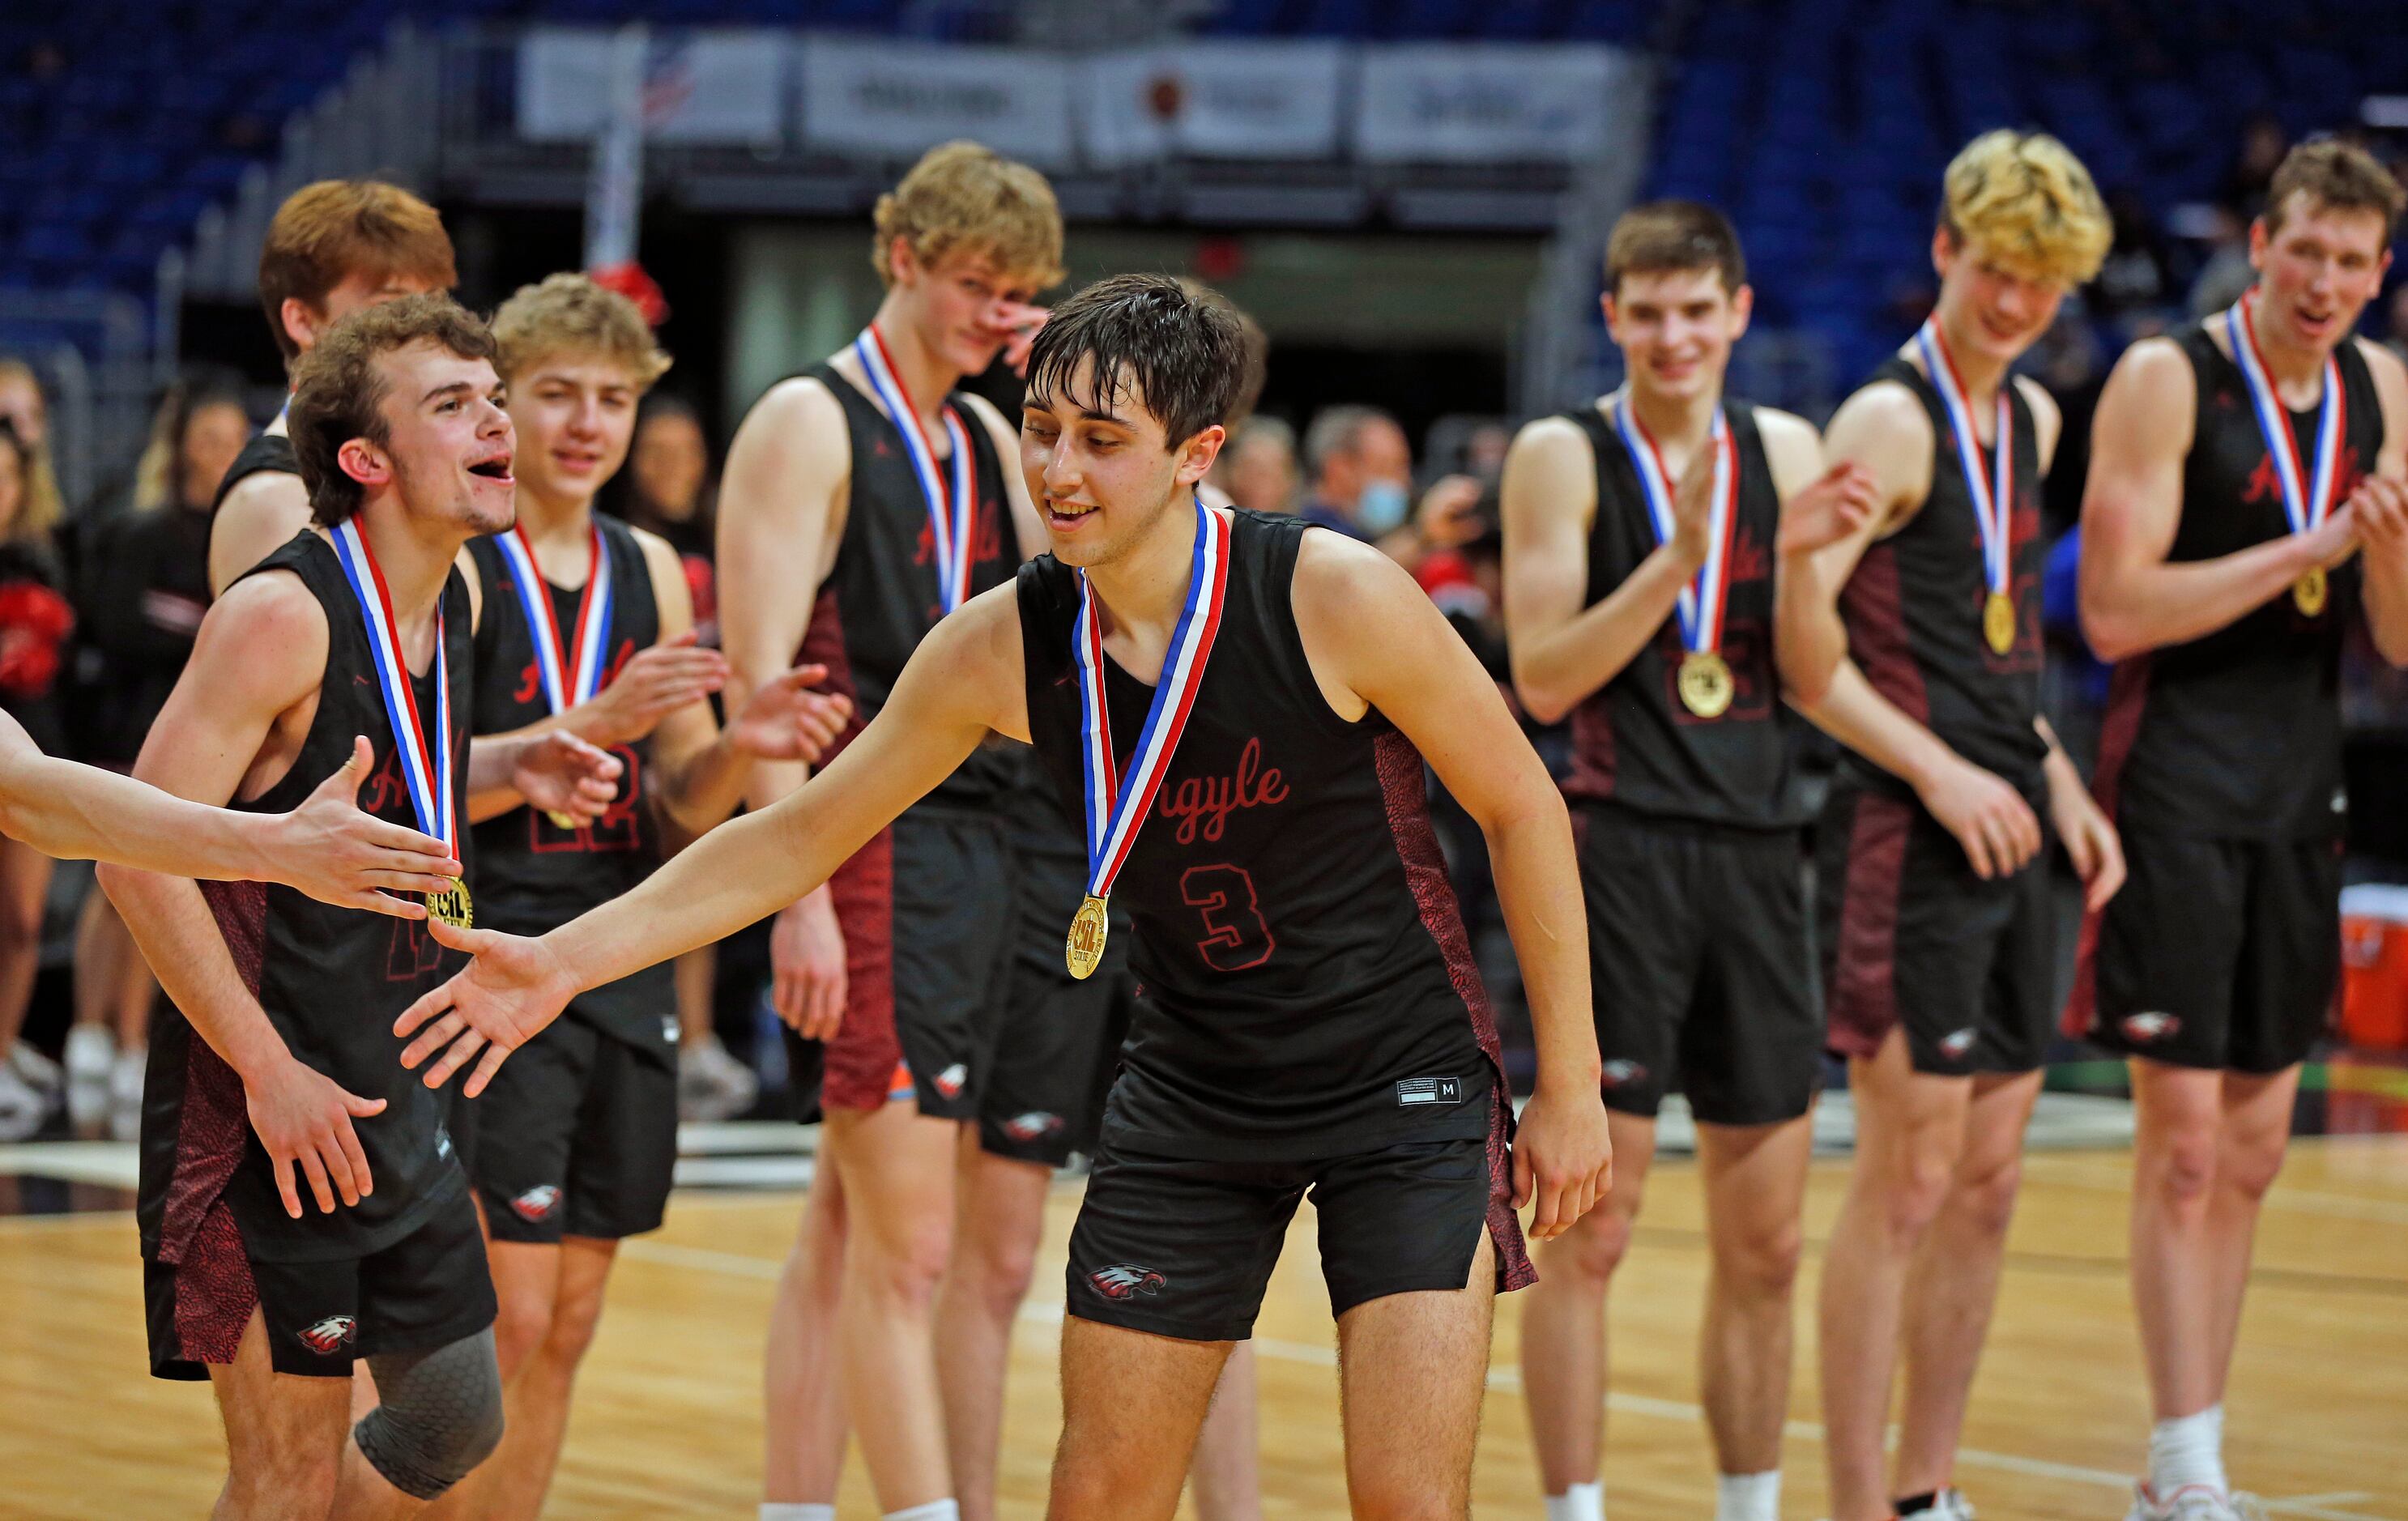 Argyle Skylar McCurry #3 is congratulated after being awarded most valuable player of the...